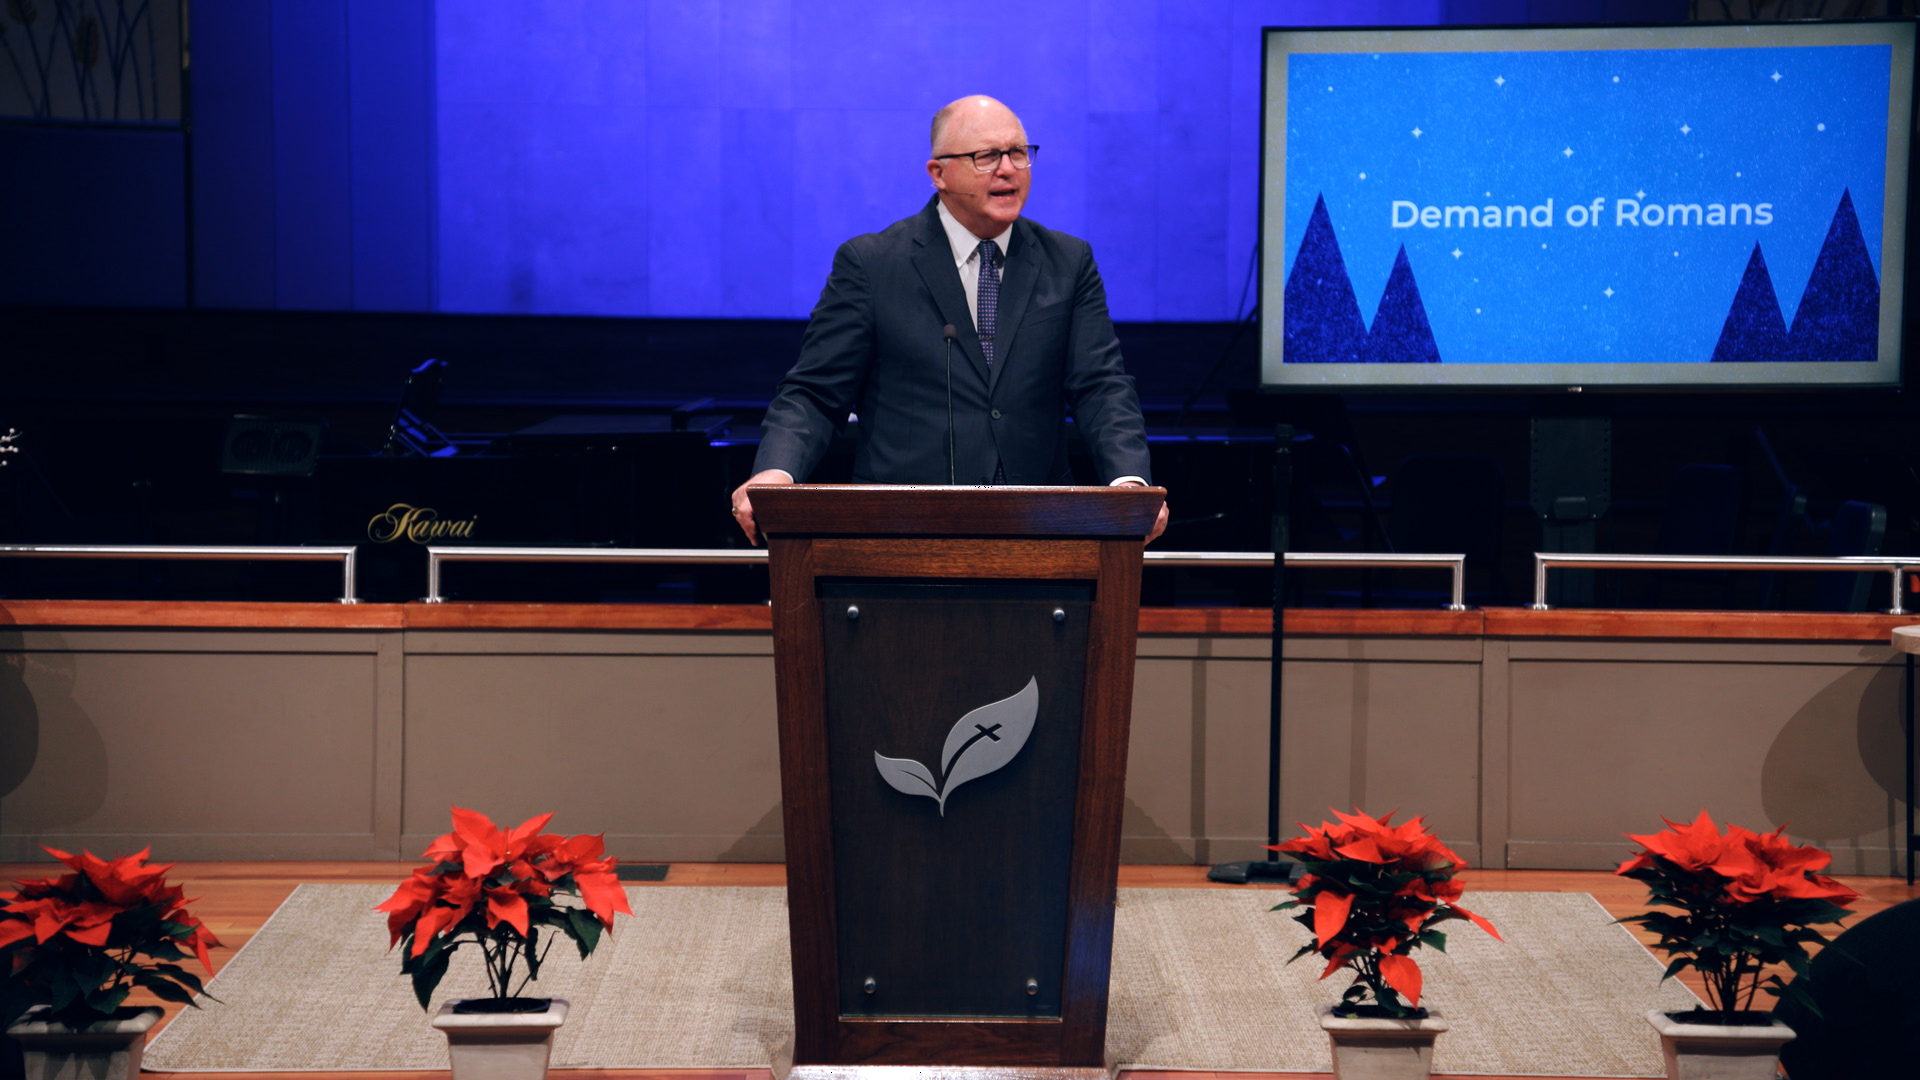 Pastor Paul Chappell: A Deliverance Presented